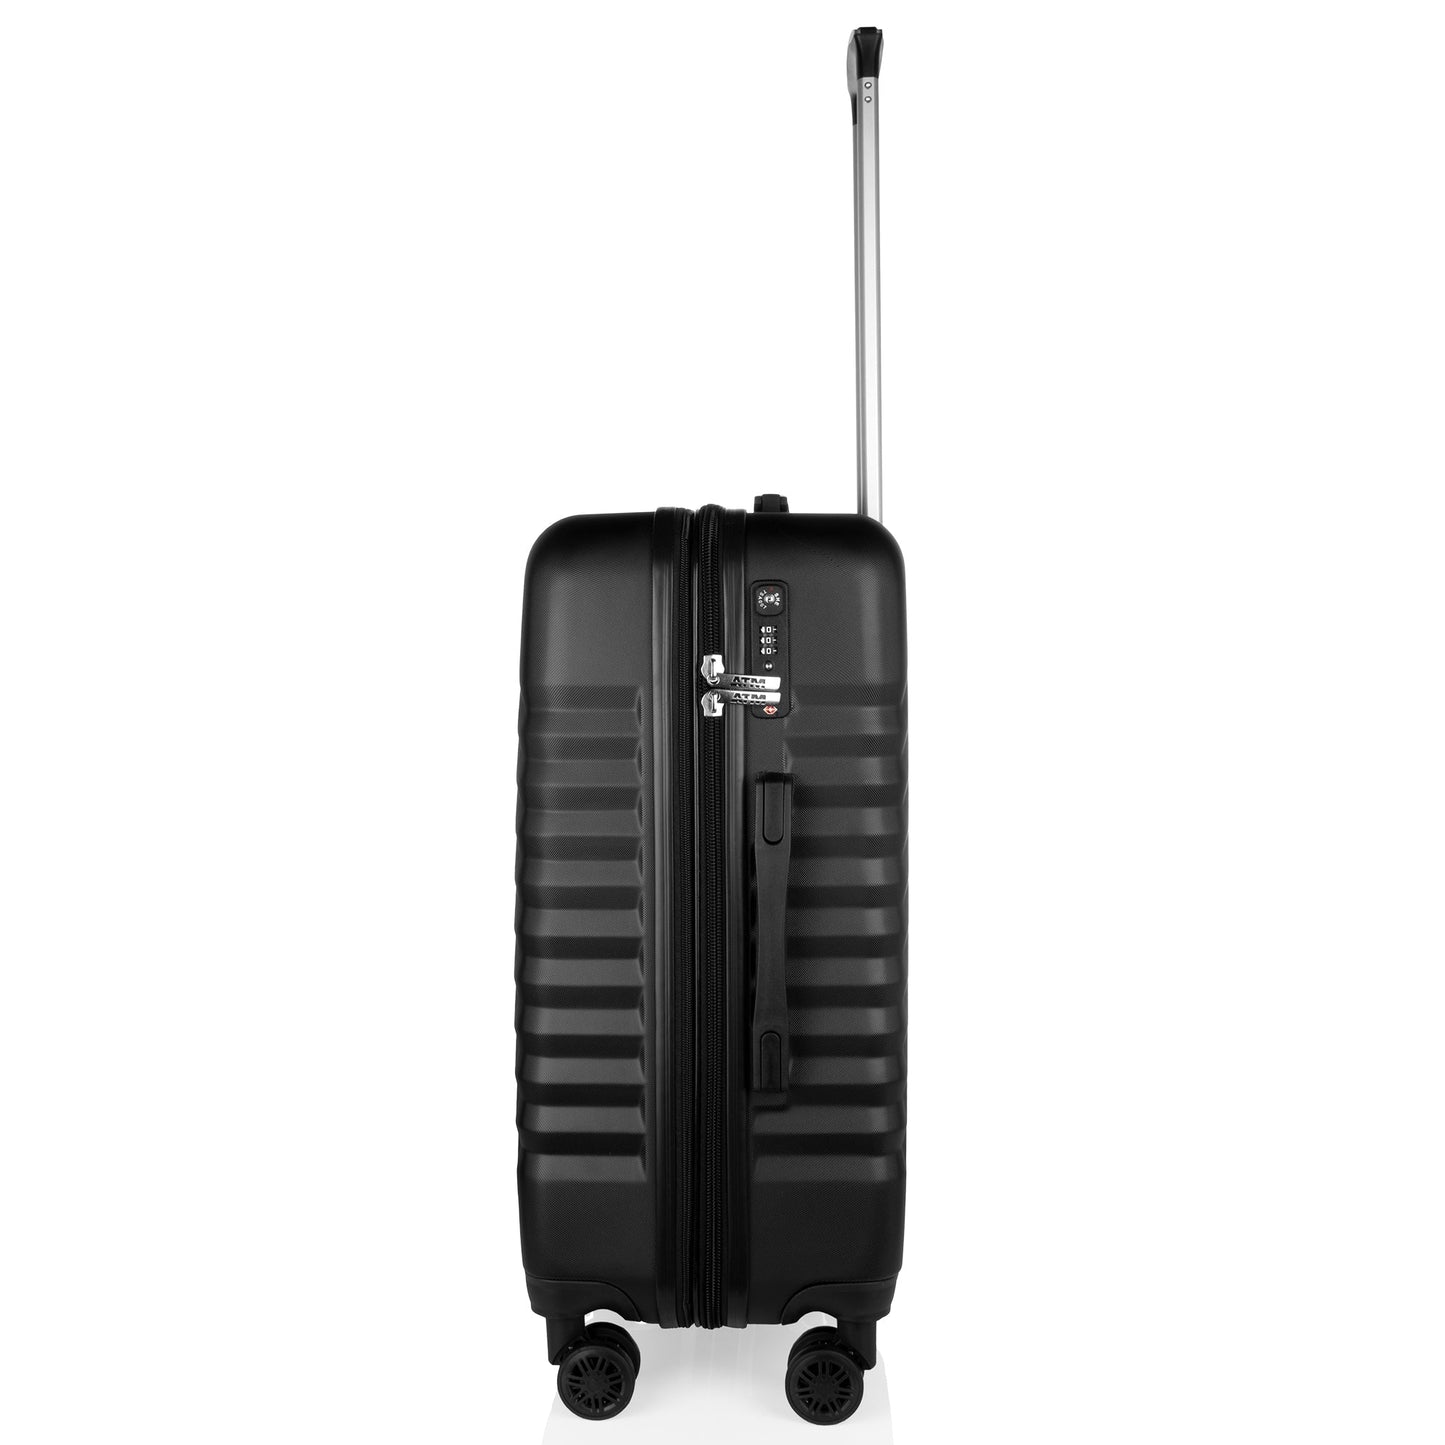 Core Collection Black Luggage 3 Piece Set (20/24/28") Suitcase Lock Spinner